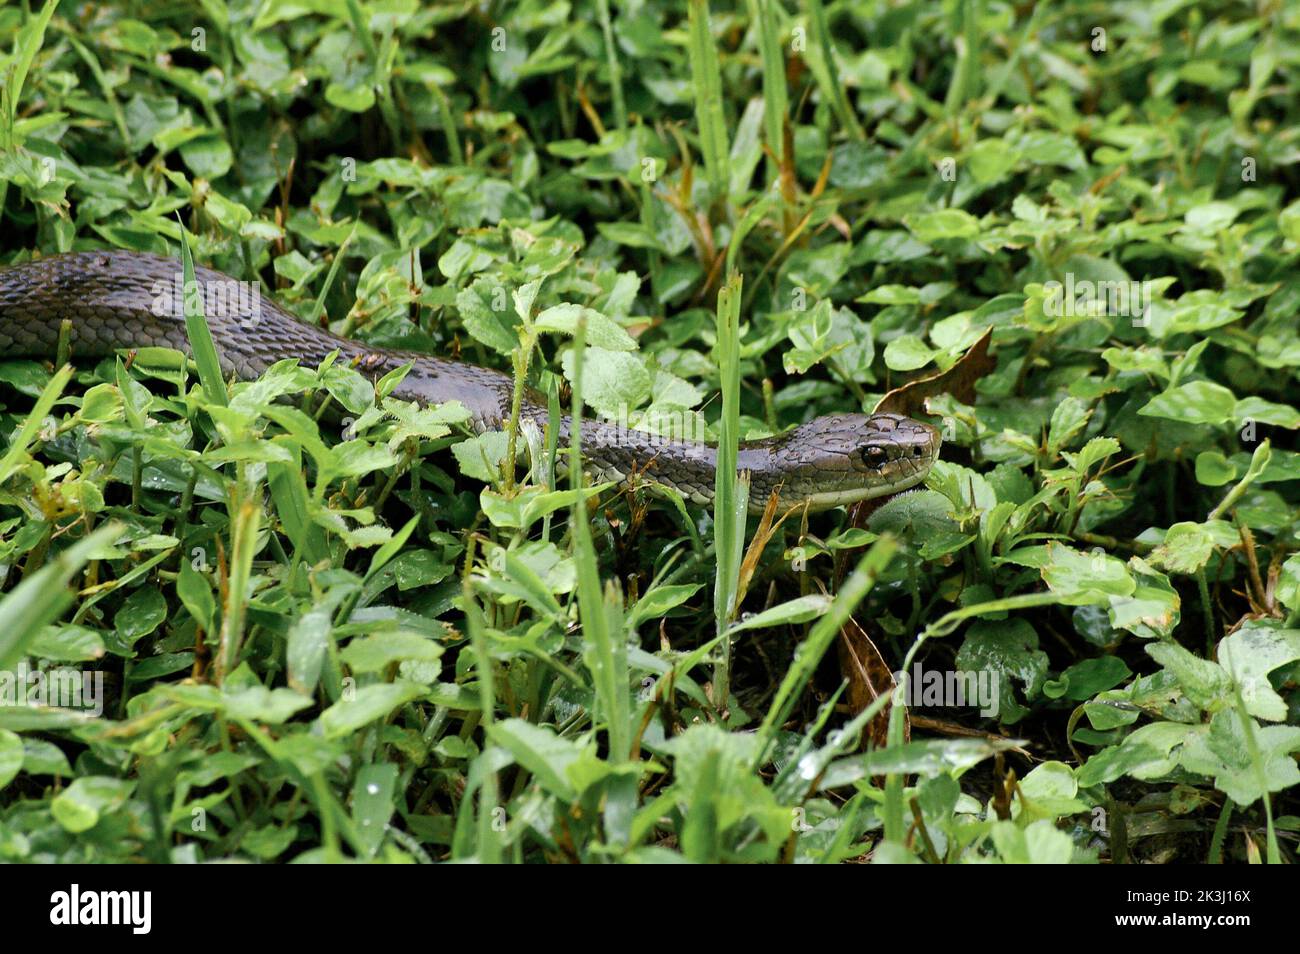 Highly venemous Australian Rough-scaled snake, Tropidechis carinatus, slithering across green ground-cover. Queensland, Australia. Stock Photo